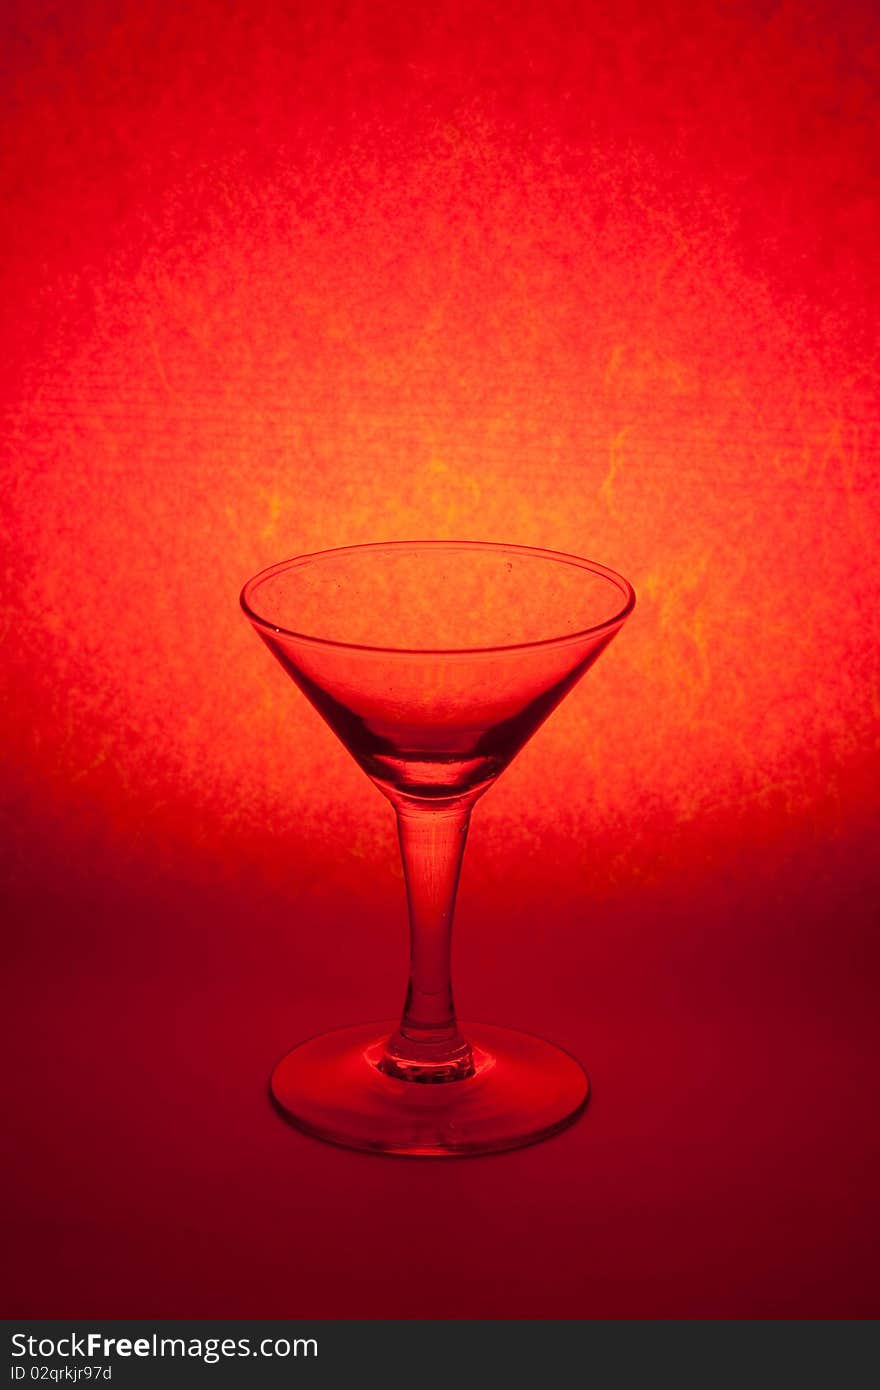 One glass on red background